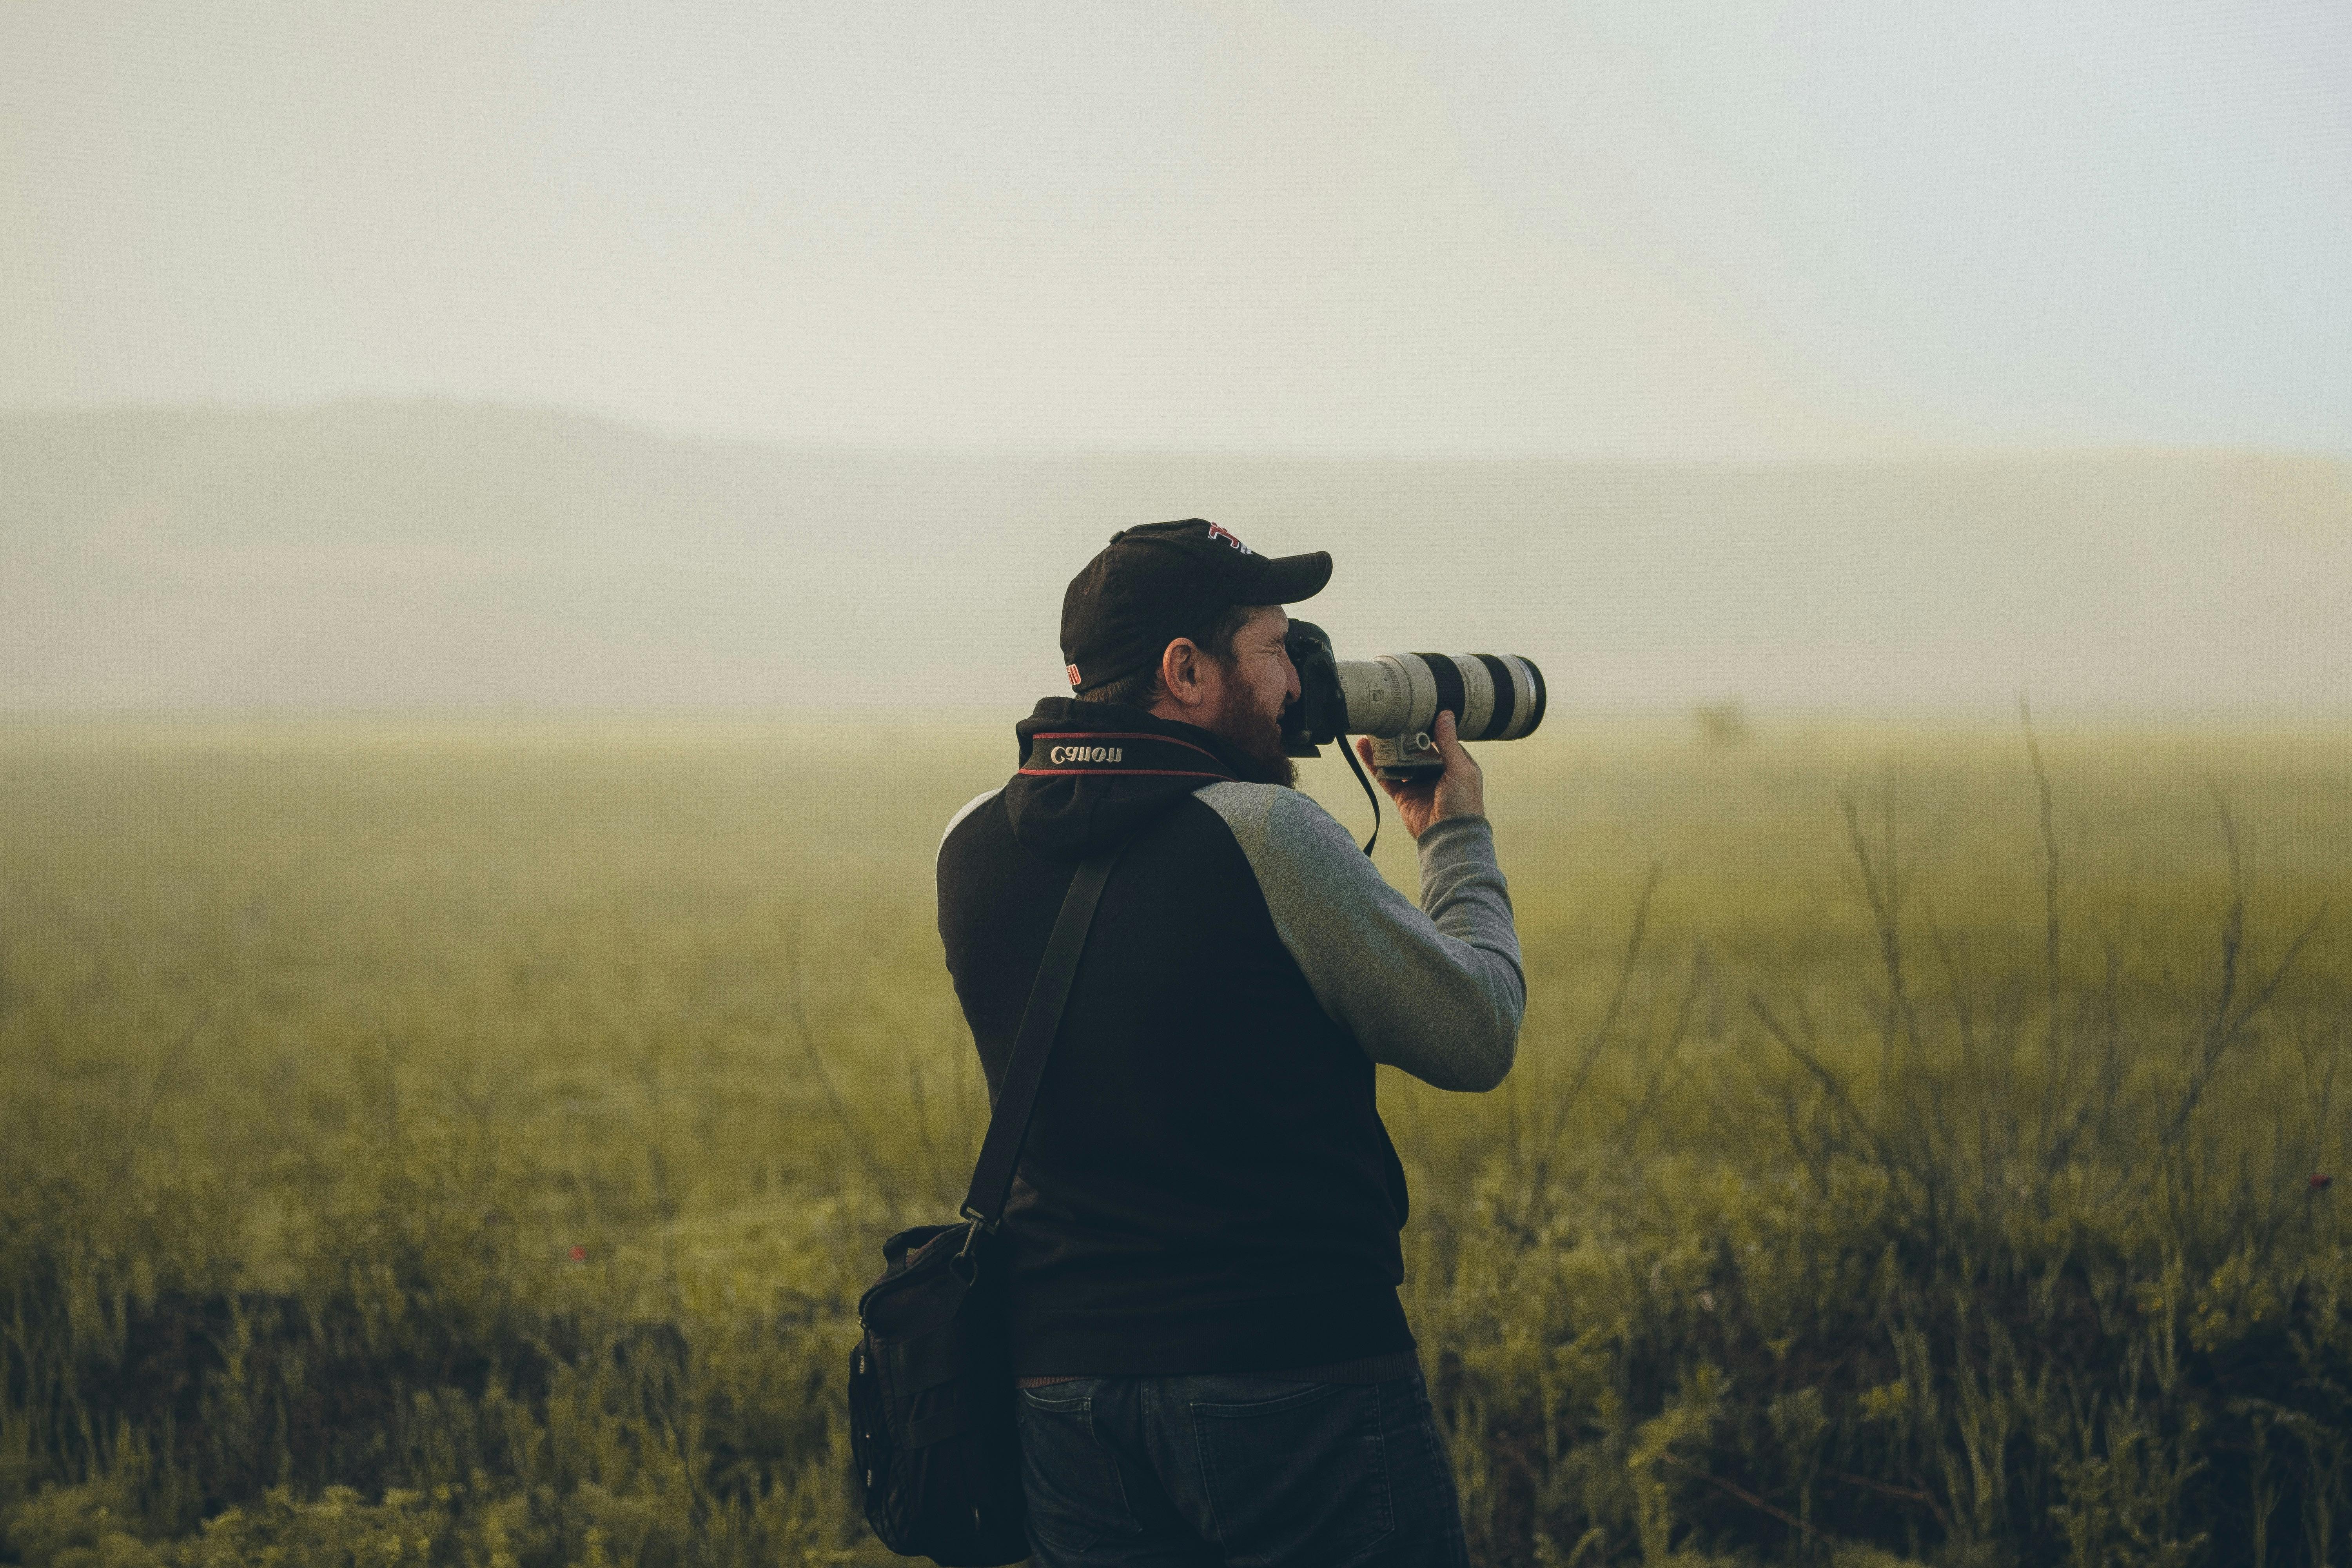 A man taking photos on his camera | Source: Pexels